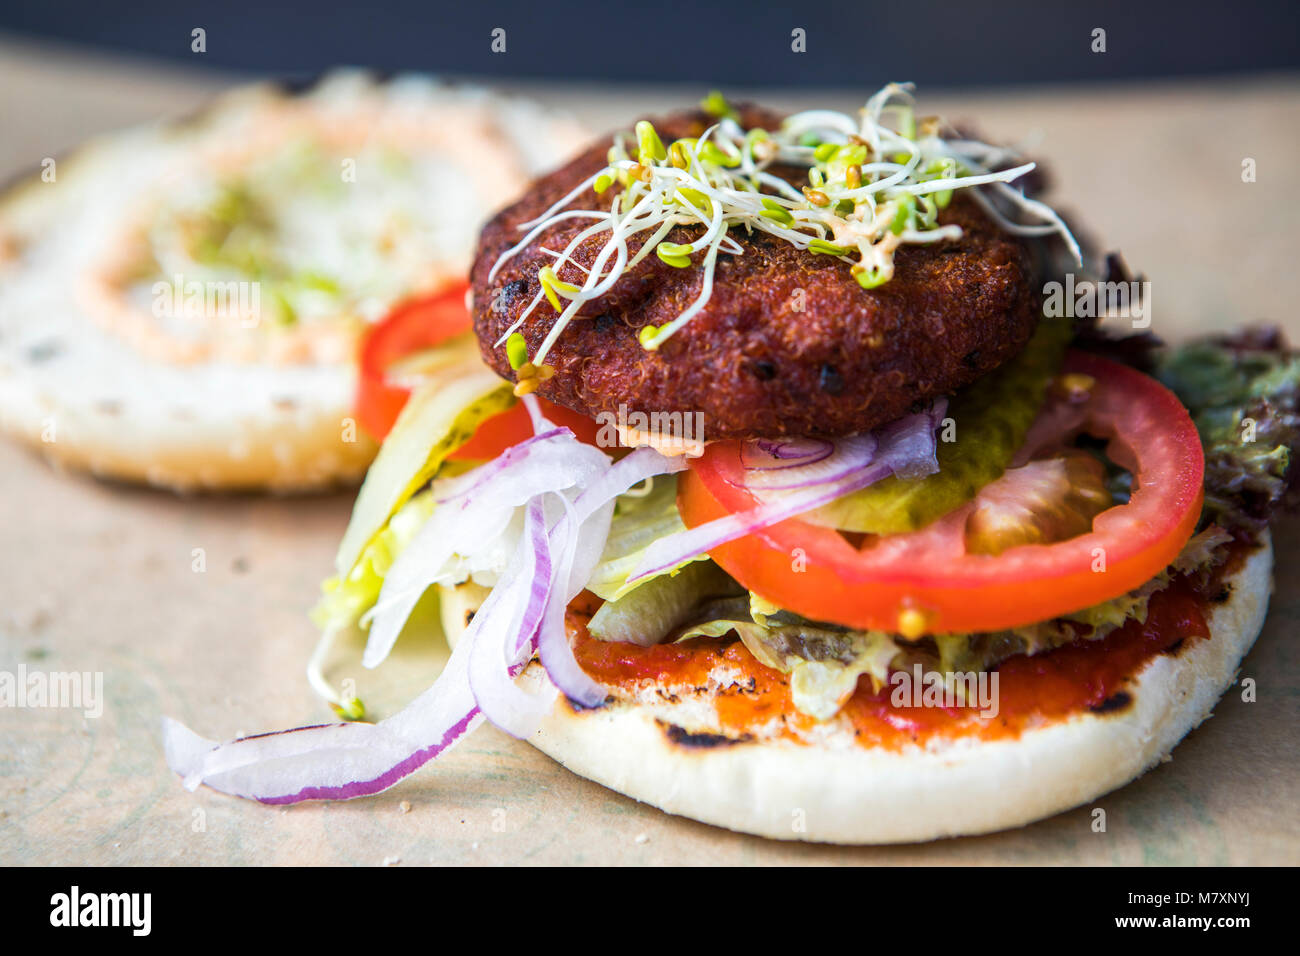 Quinoa burger, vegan street food with tomato and sprouting herbs. Stock Photo